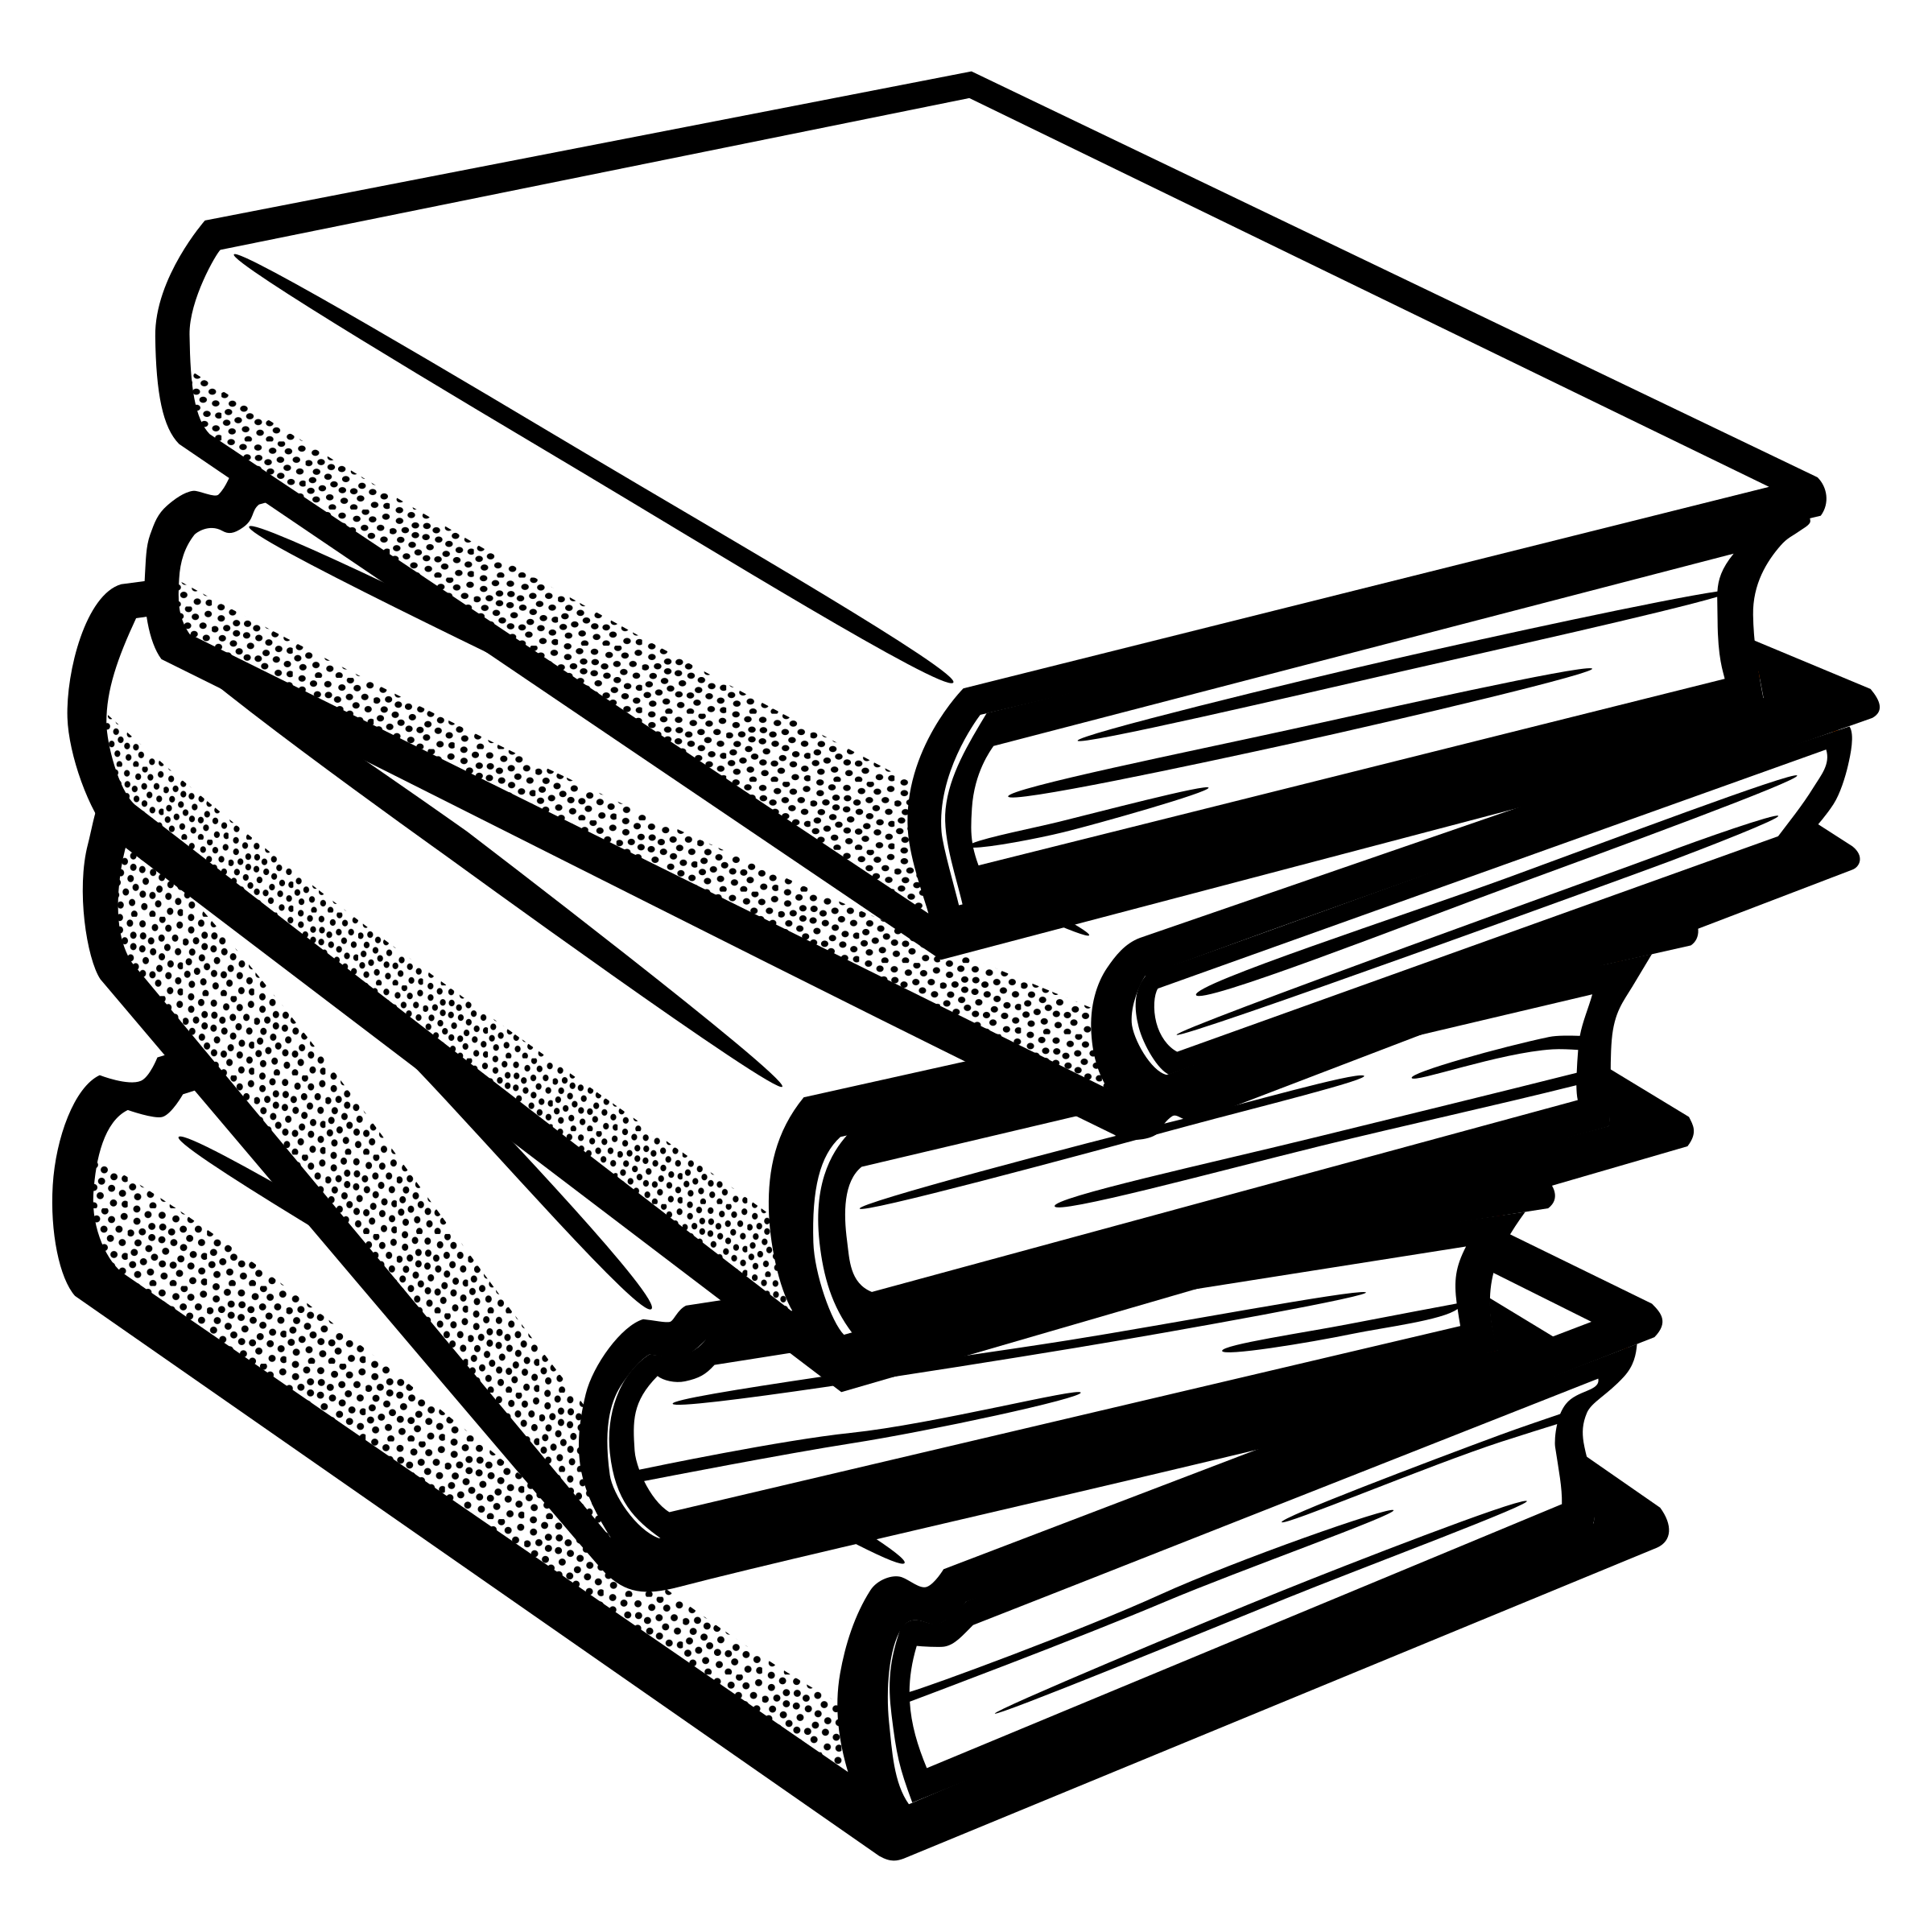 Books lineart by frankes. Worm clipart book review